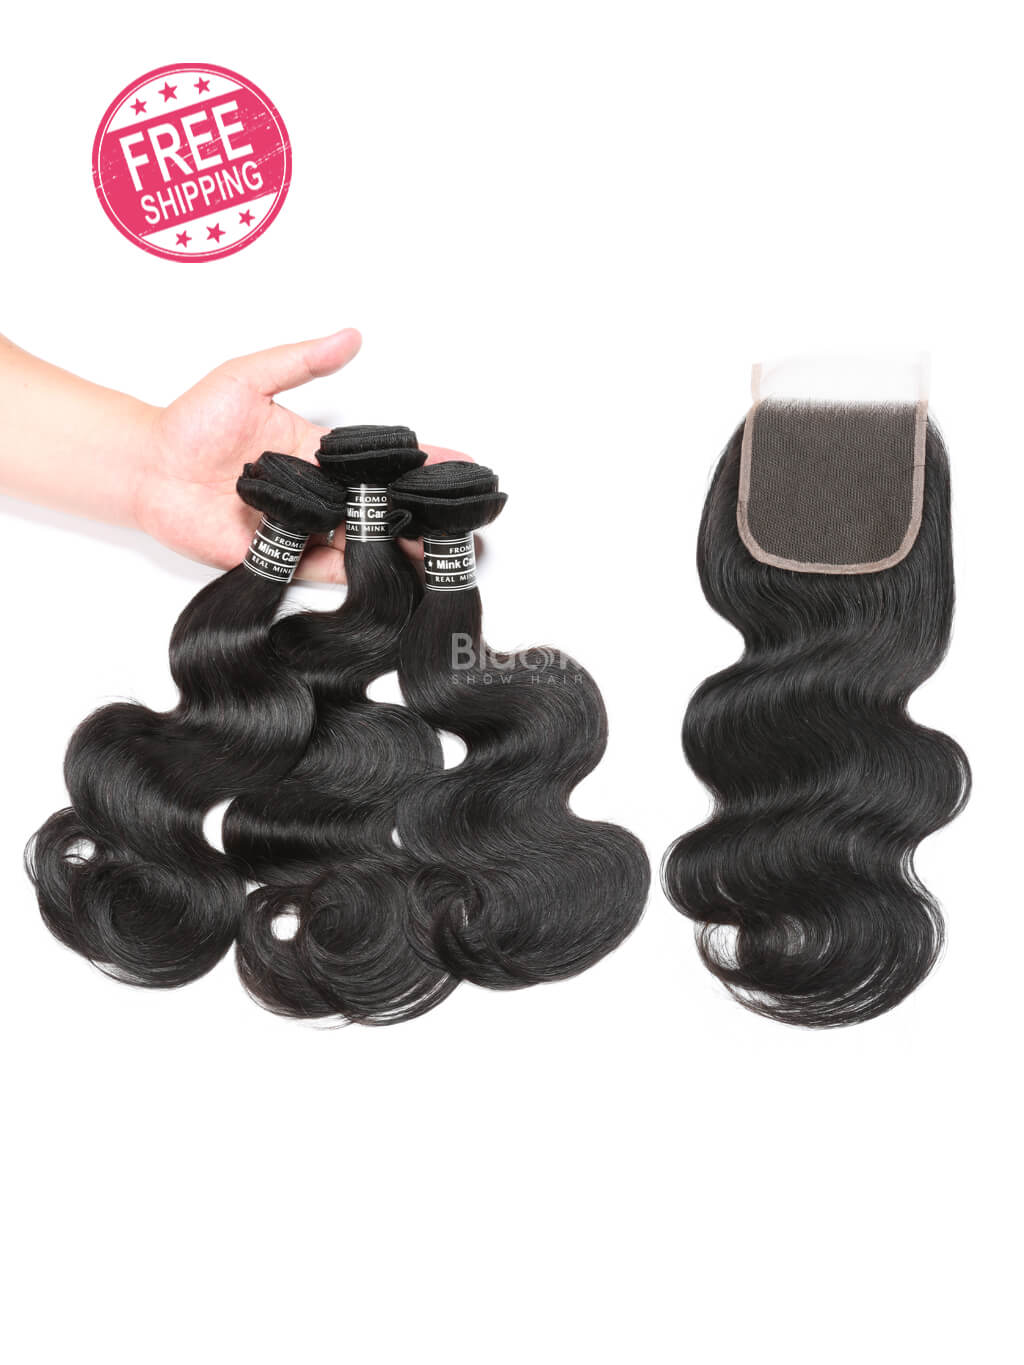 body wave bundles with closure 4x4 cambodian hair